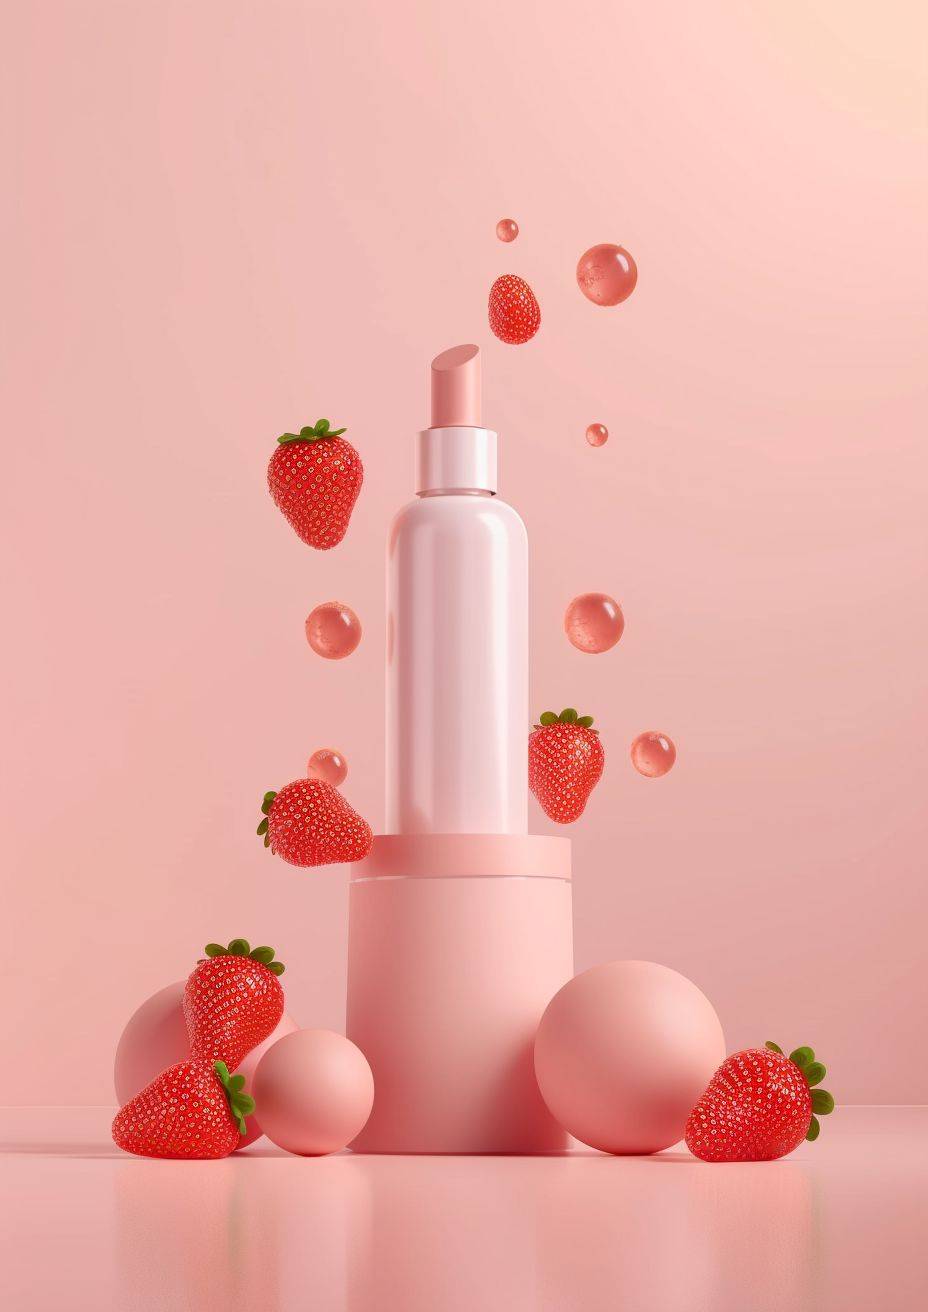 Bottle of cosmetics high end poster background light pink gradient colour background, strawberry, C4D render HD 12K.